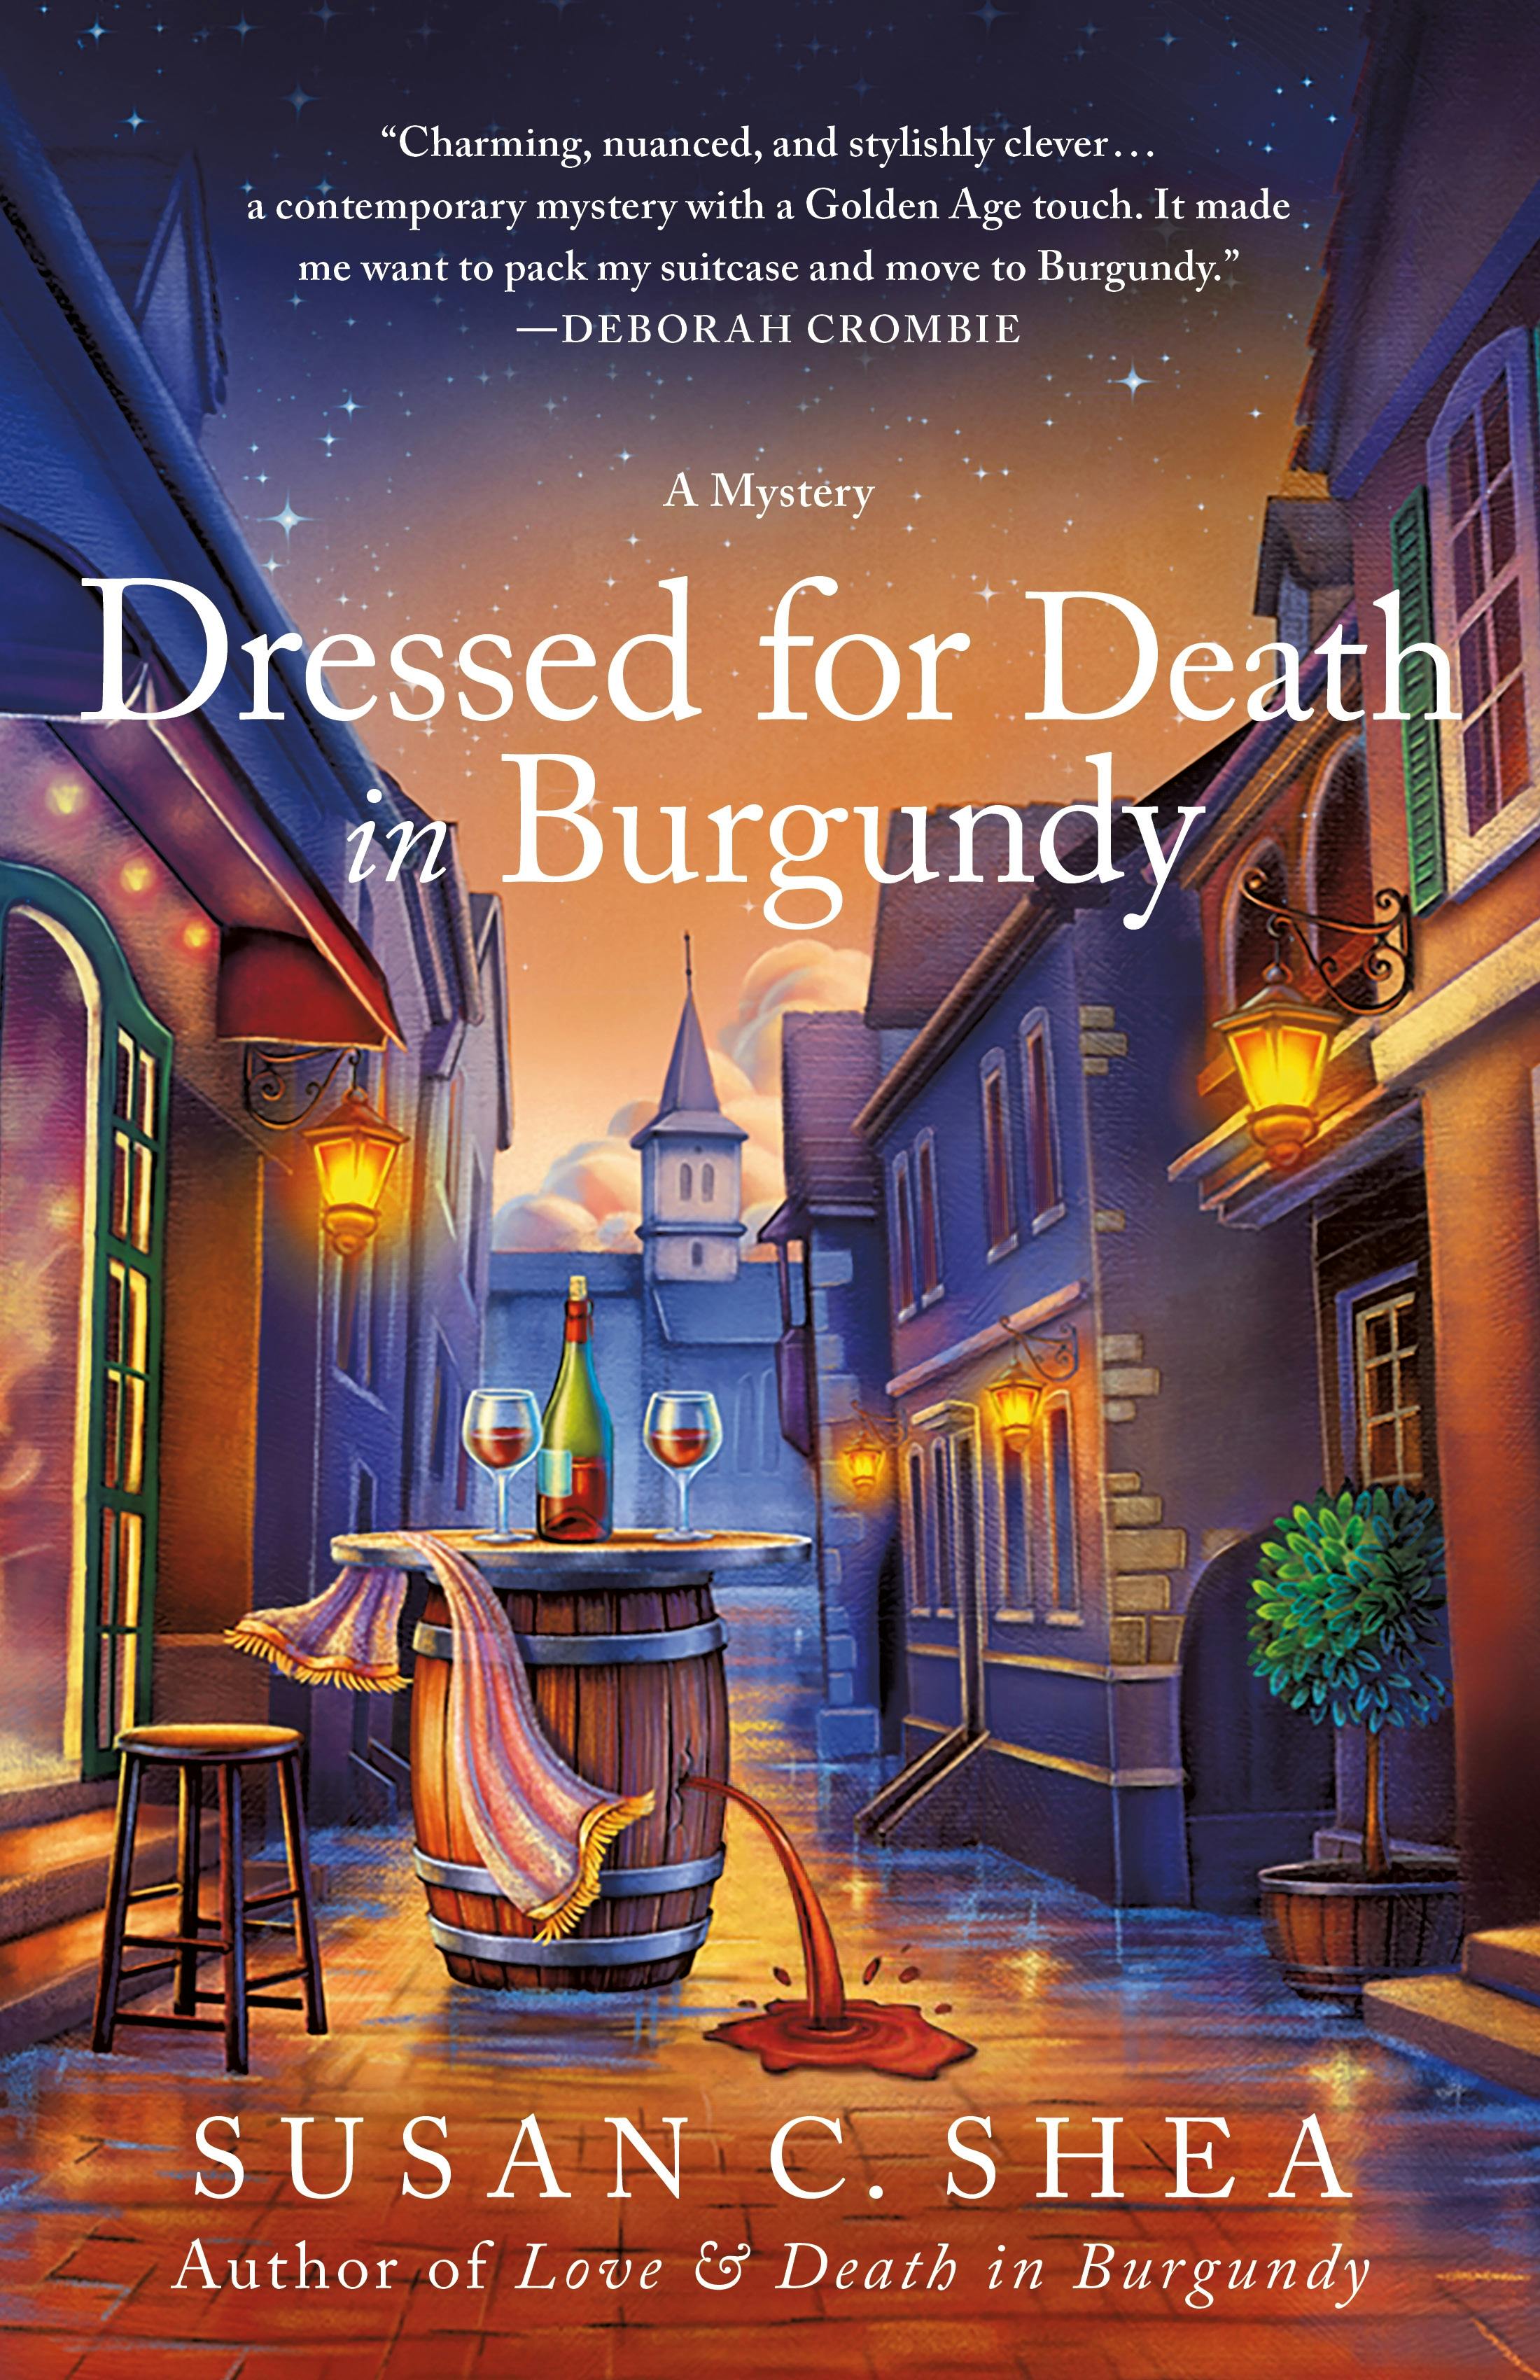 Image of Dressed for Death in Burgundy